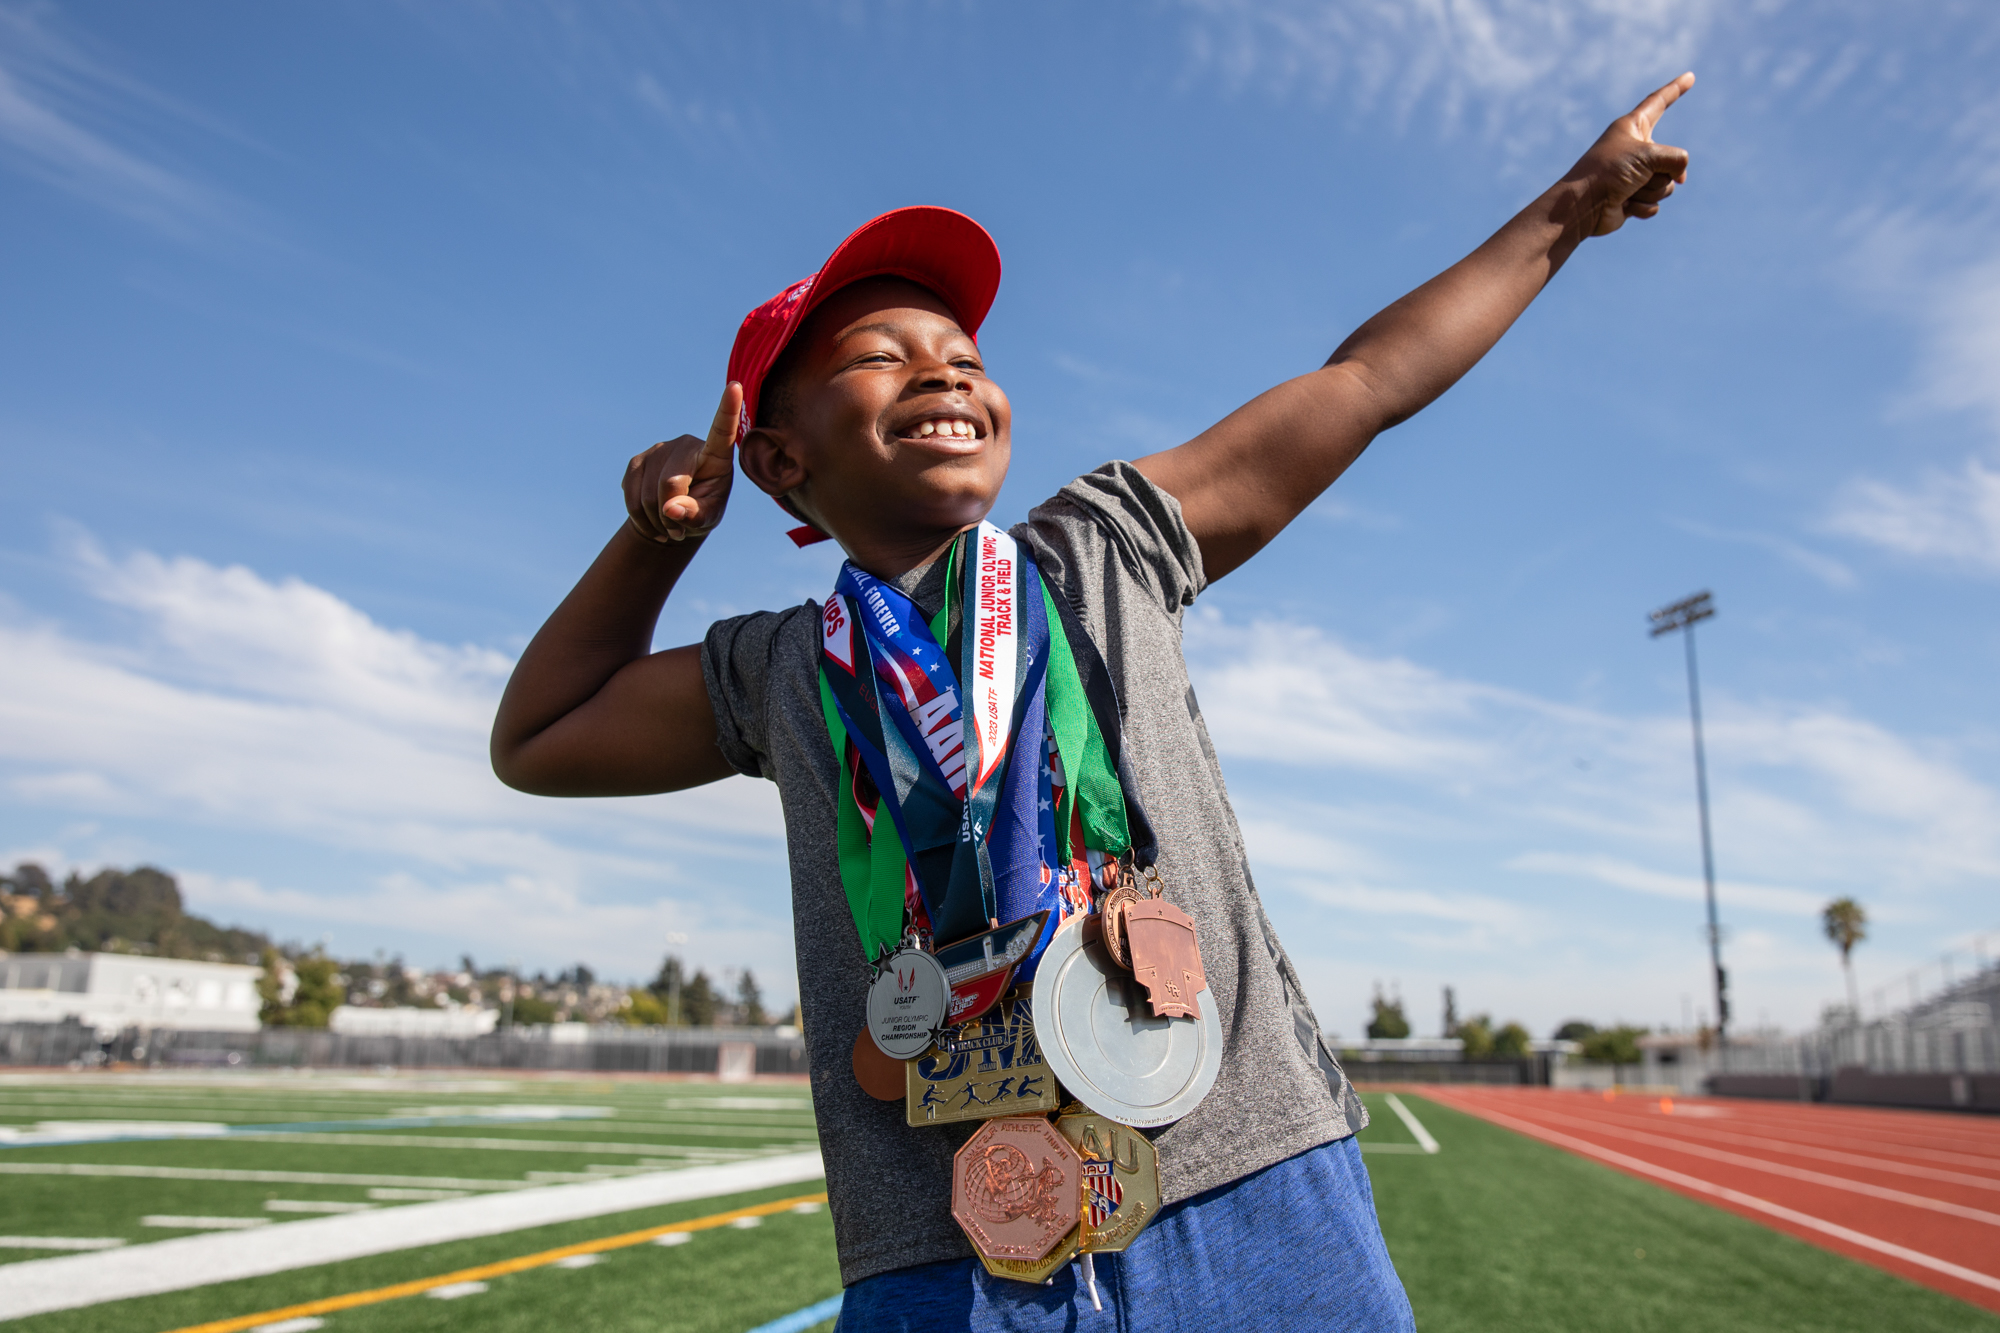 A boy poses for a photo with over ten medals hanging from around his neck.